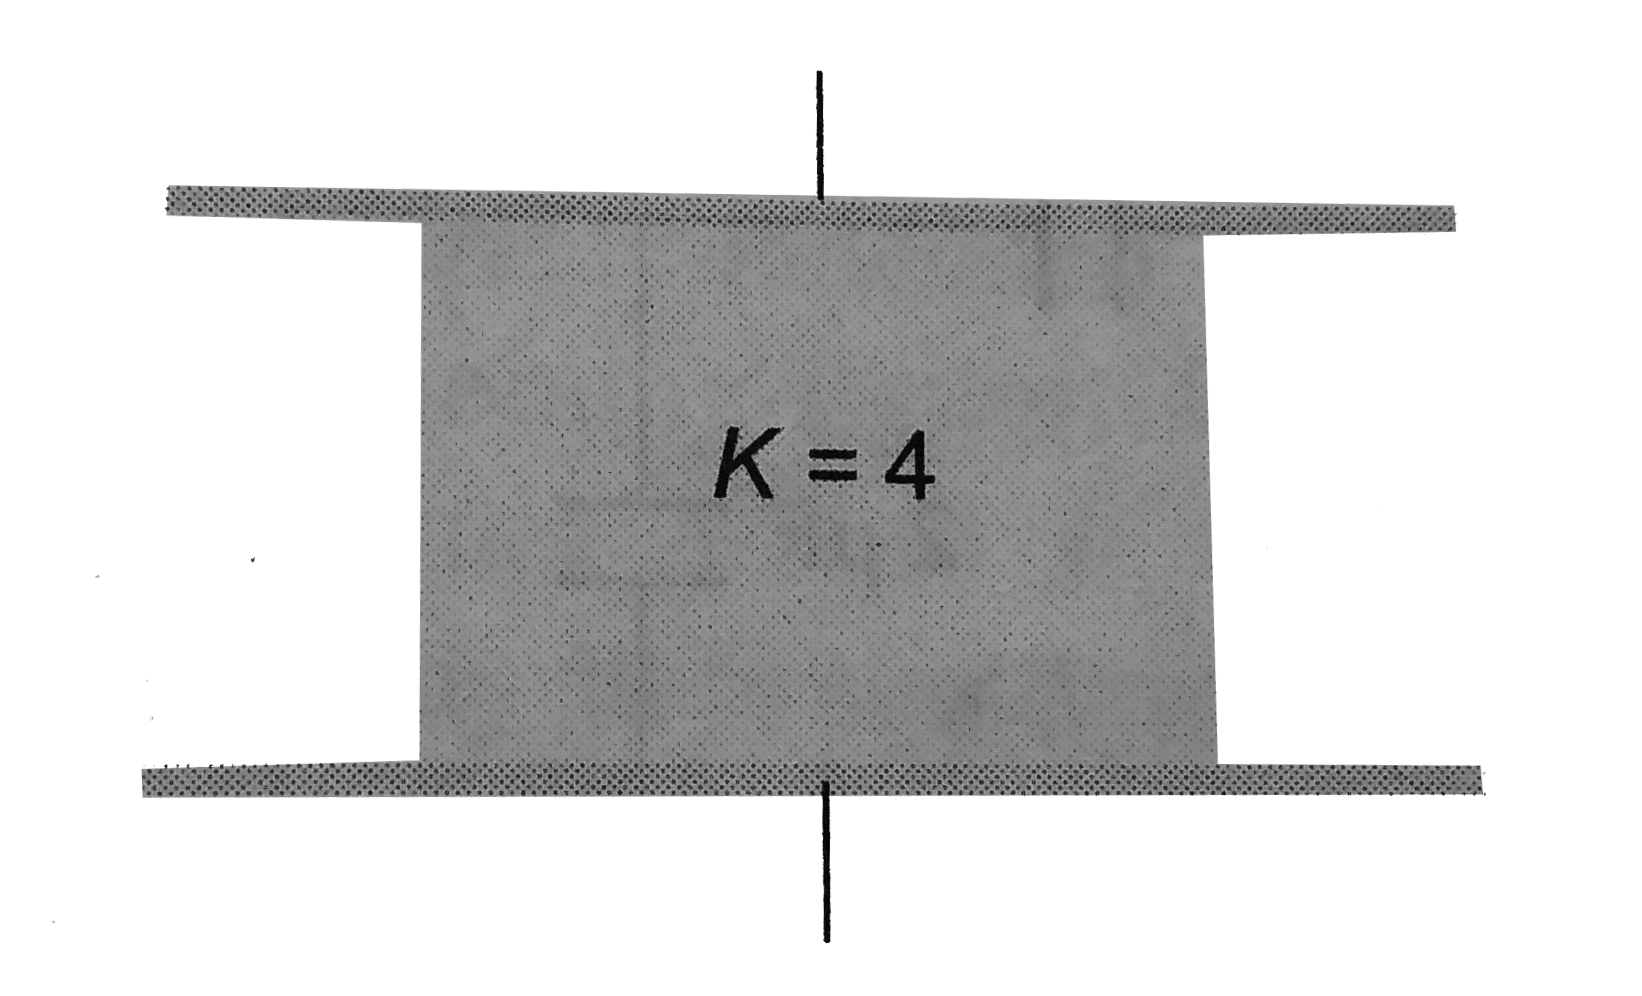 Consider a parallel plate capacitor of 10 muF with air filled in the gap between the plates. Now one half of the space between the plates is filled with a dielectric of dielectric constant 4, as shown in the figure. The capacity of the capacitor charges to